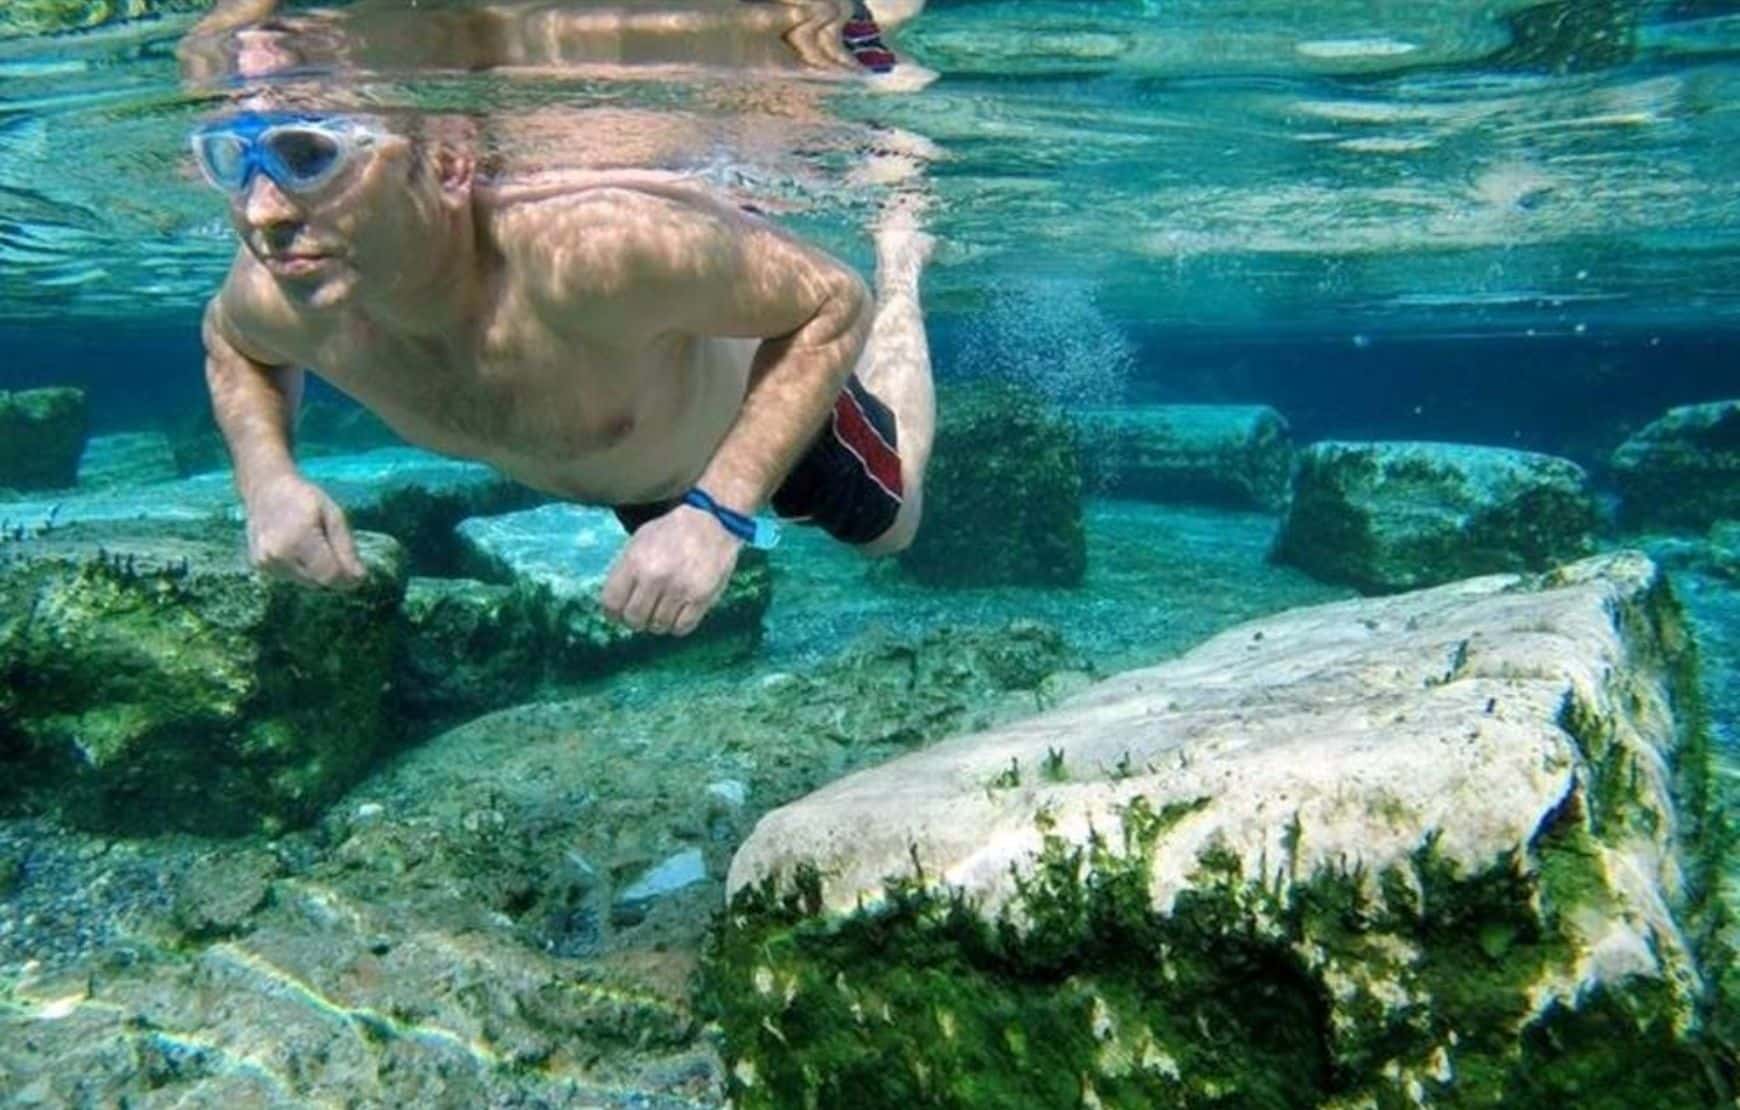 You can swim in Cleopatra's pool in our Pamukkale tour from Antalya